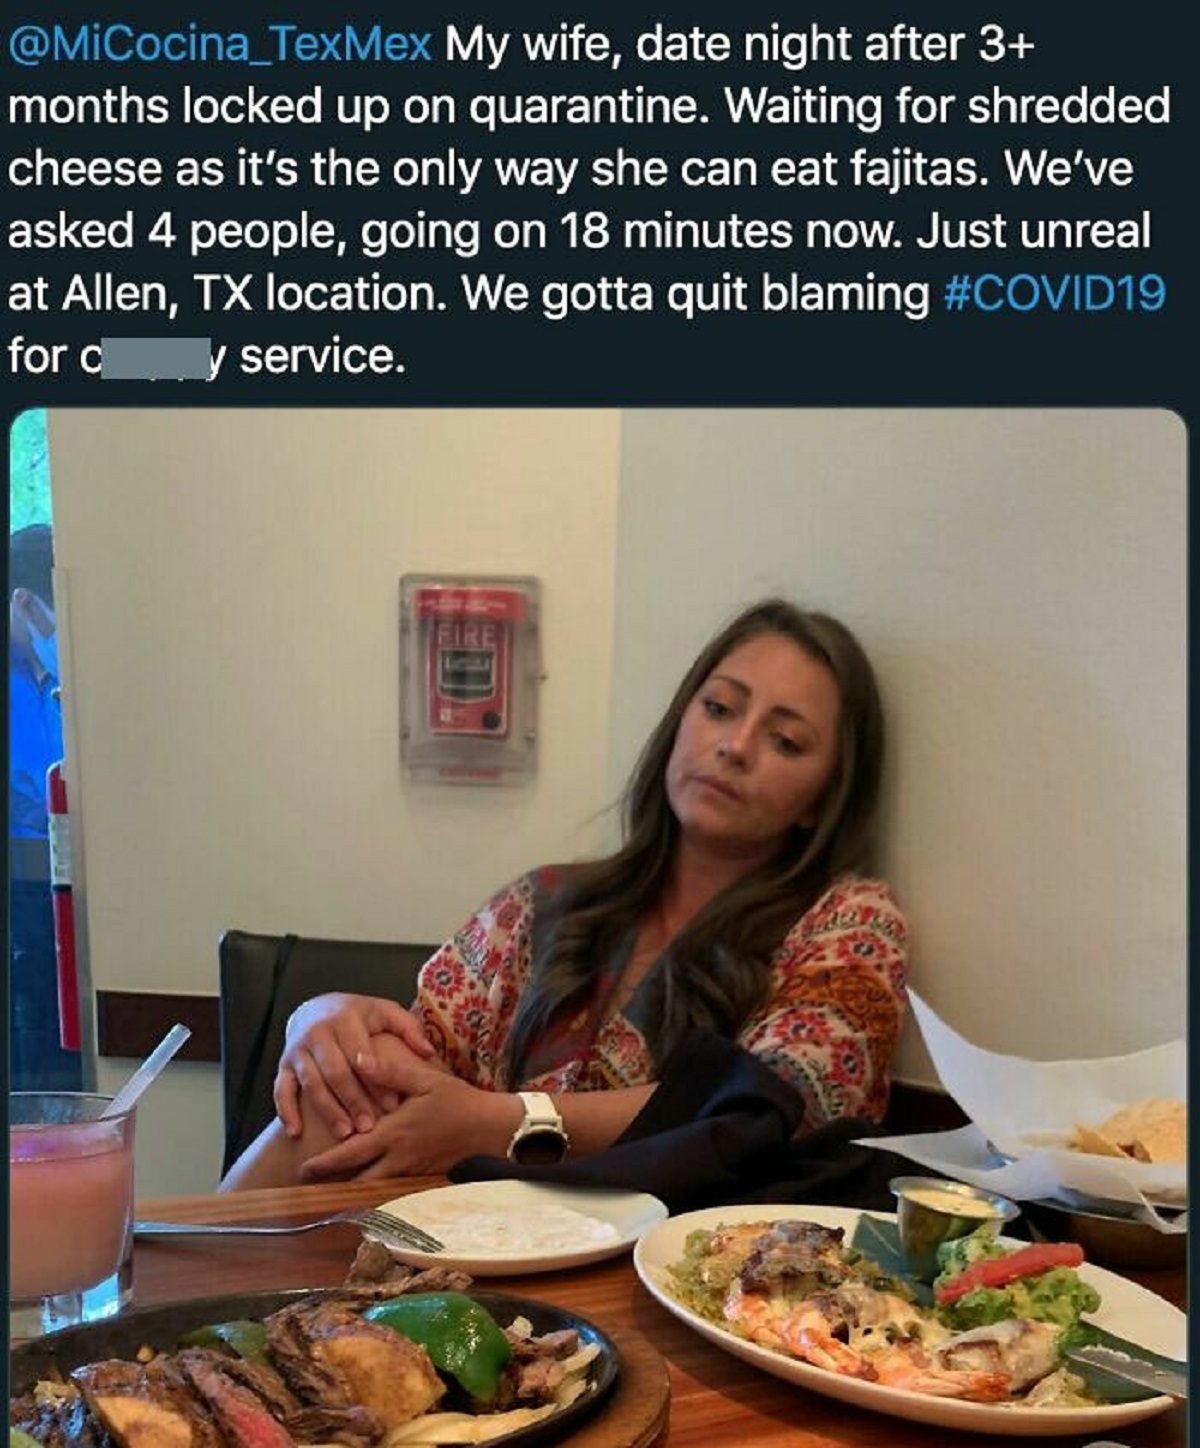 fajita cheese wife - My wife, date night after 3 months locked up on quarantine. Waiting for shredded cheese as it's the only way she can eat fajitas. We've asked 4 people, going on 18 minutes now. Just unreal at Allen, Tx location. We gotta quit blaming 